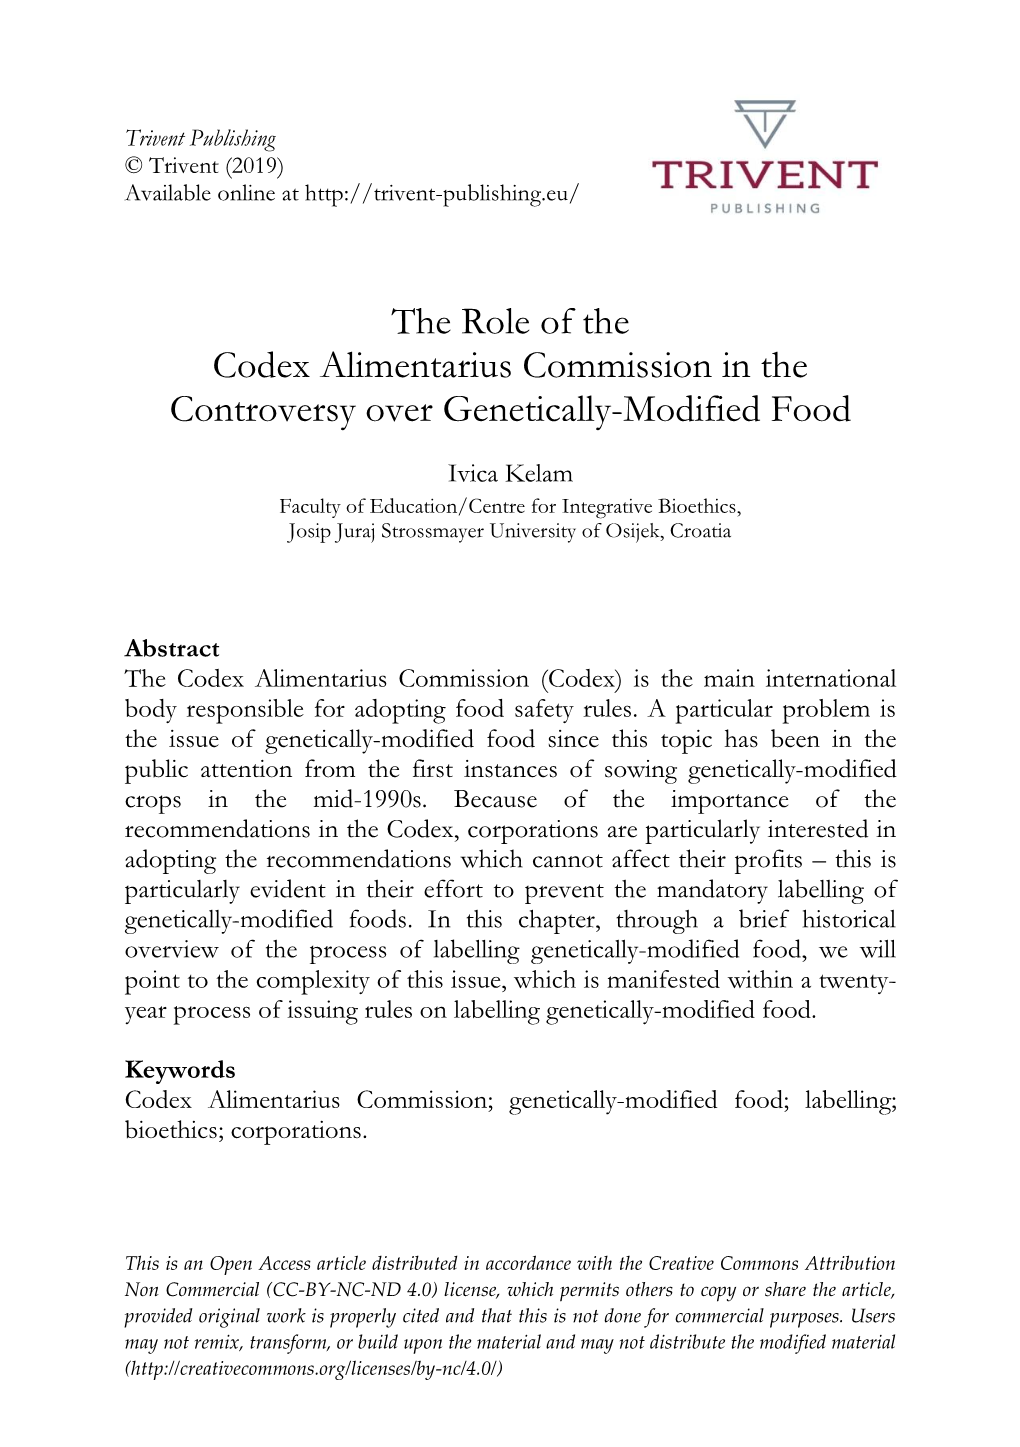 The Role of the Codex Alimentarius Commission in the Controversy Over Genetically-Modified Food